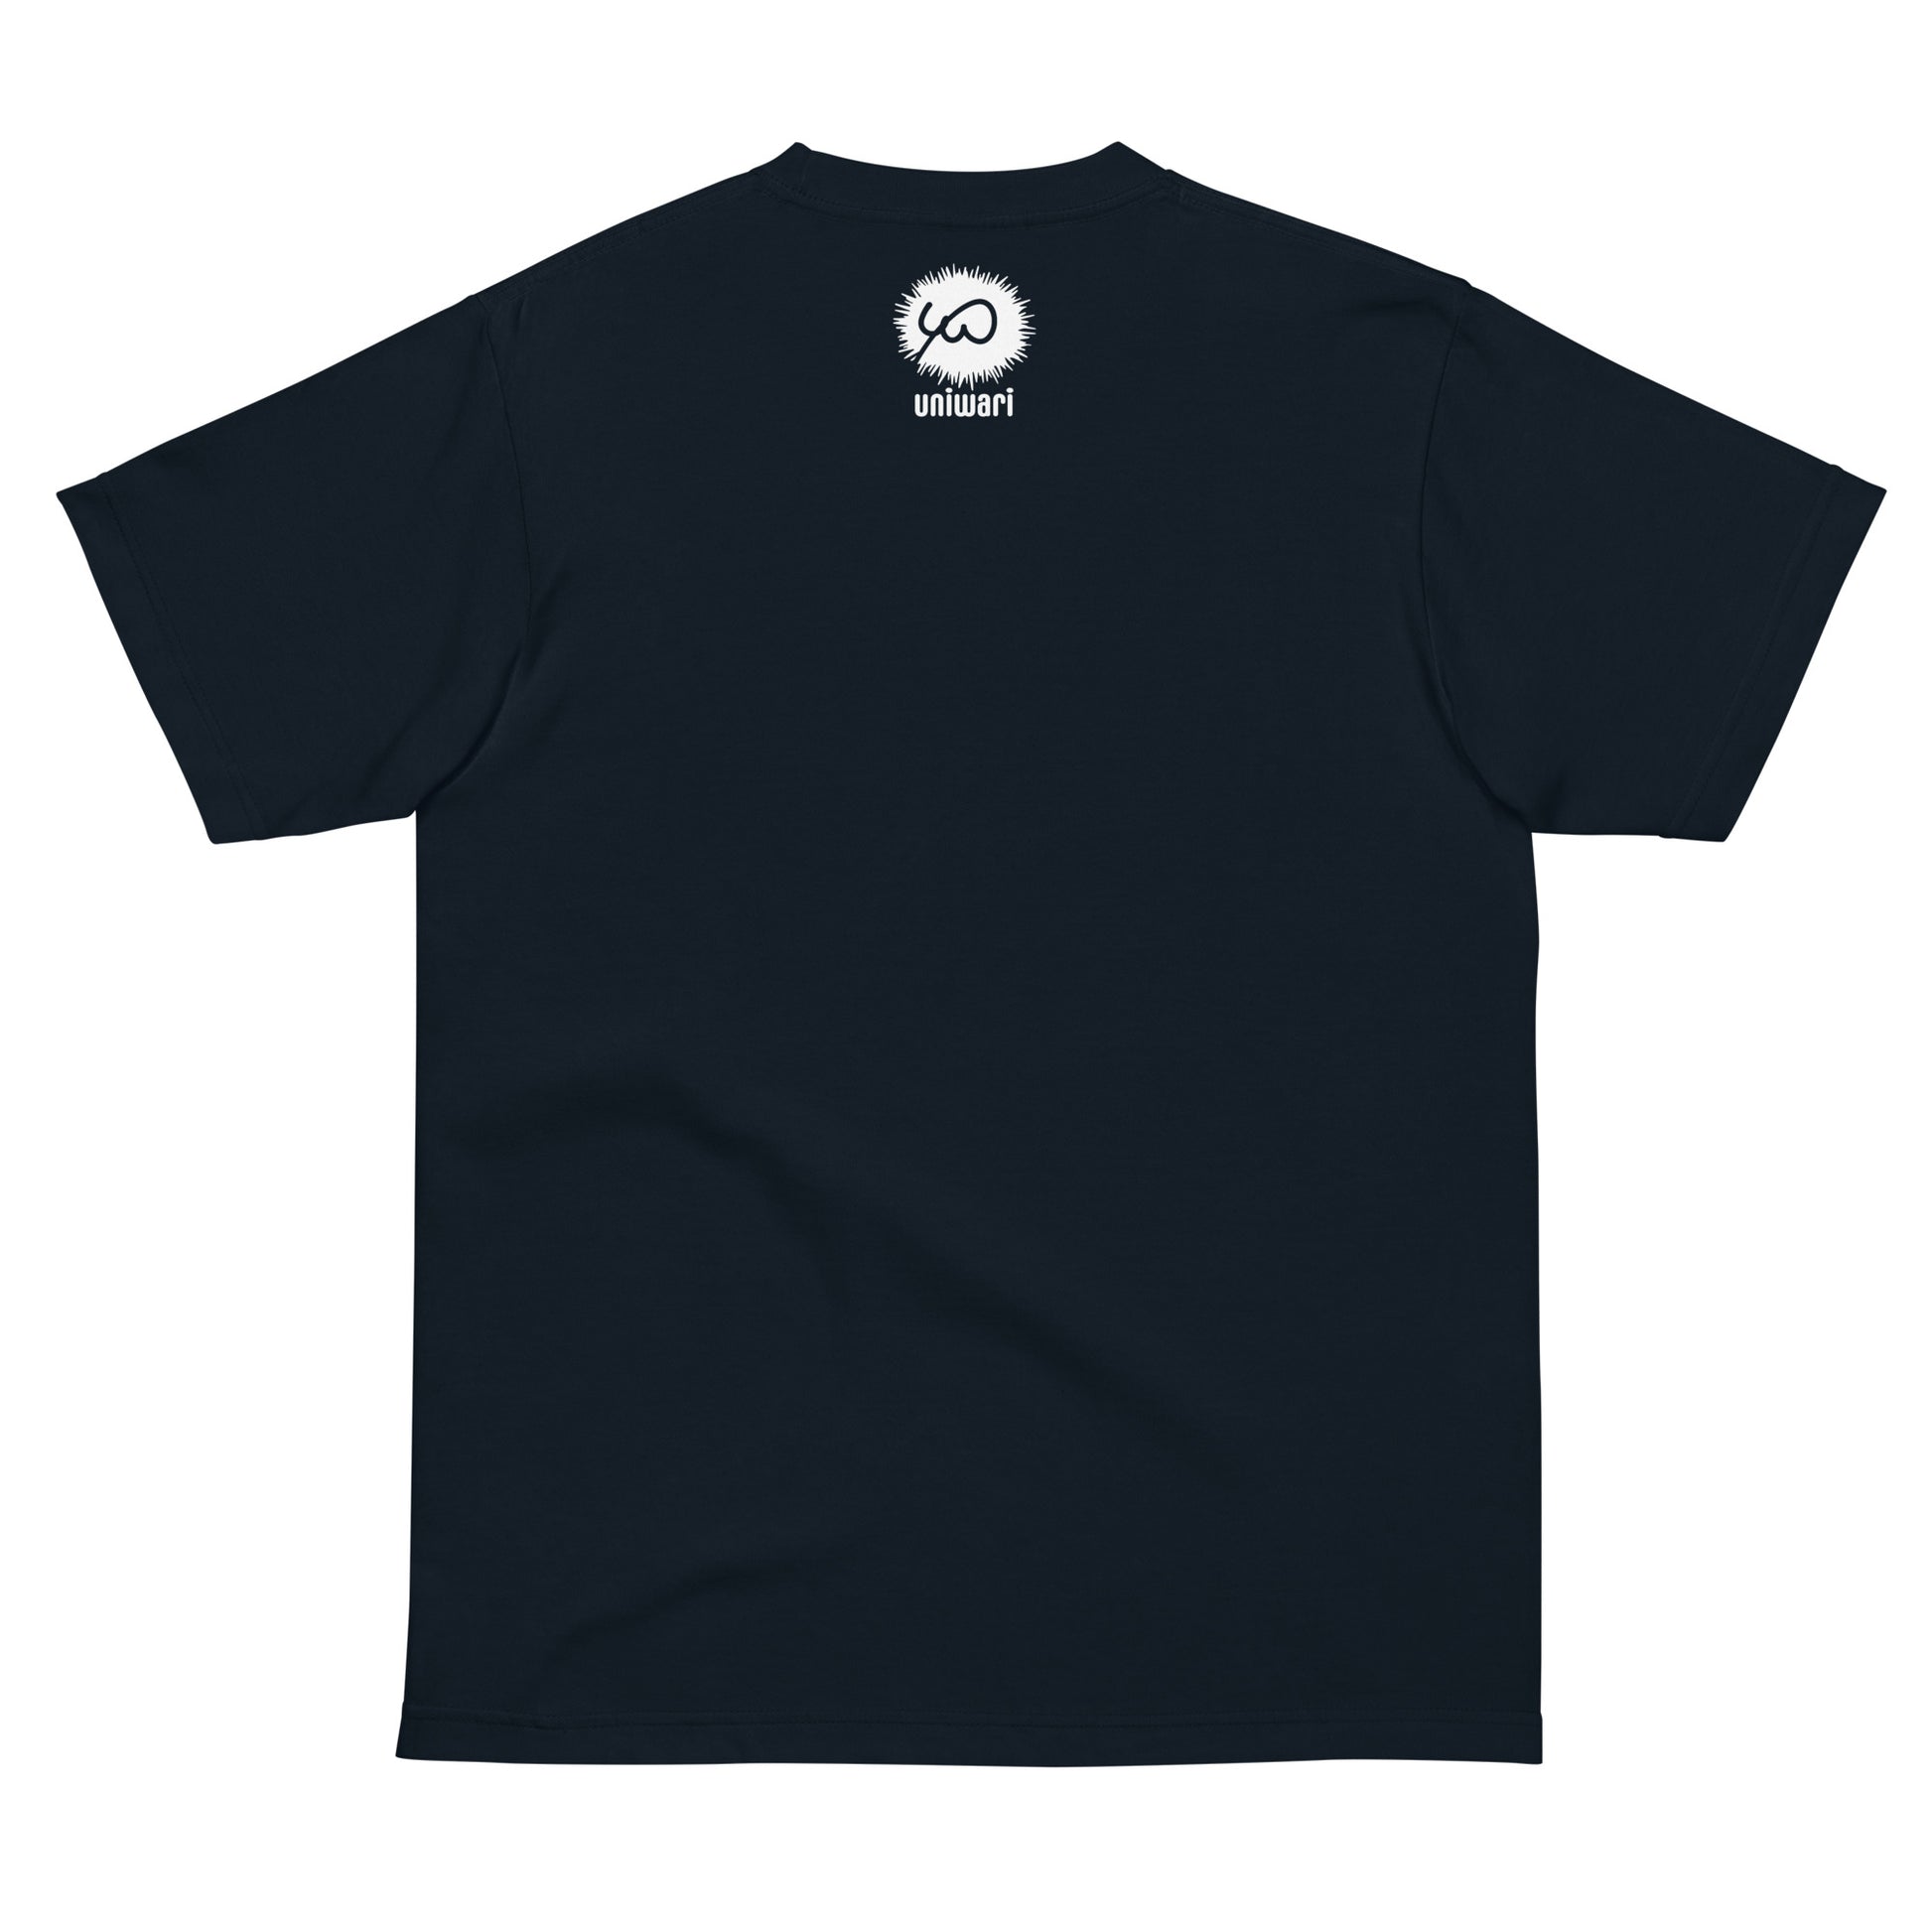 Navy High Quality Tee - Front Design with an White Uniwari Logo - Back Design with Weekdays in Japanese and Green back ground